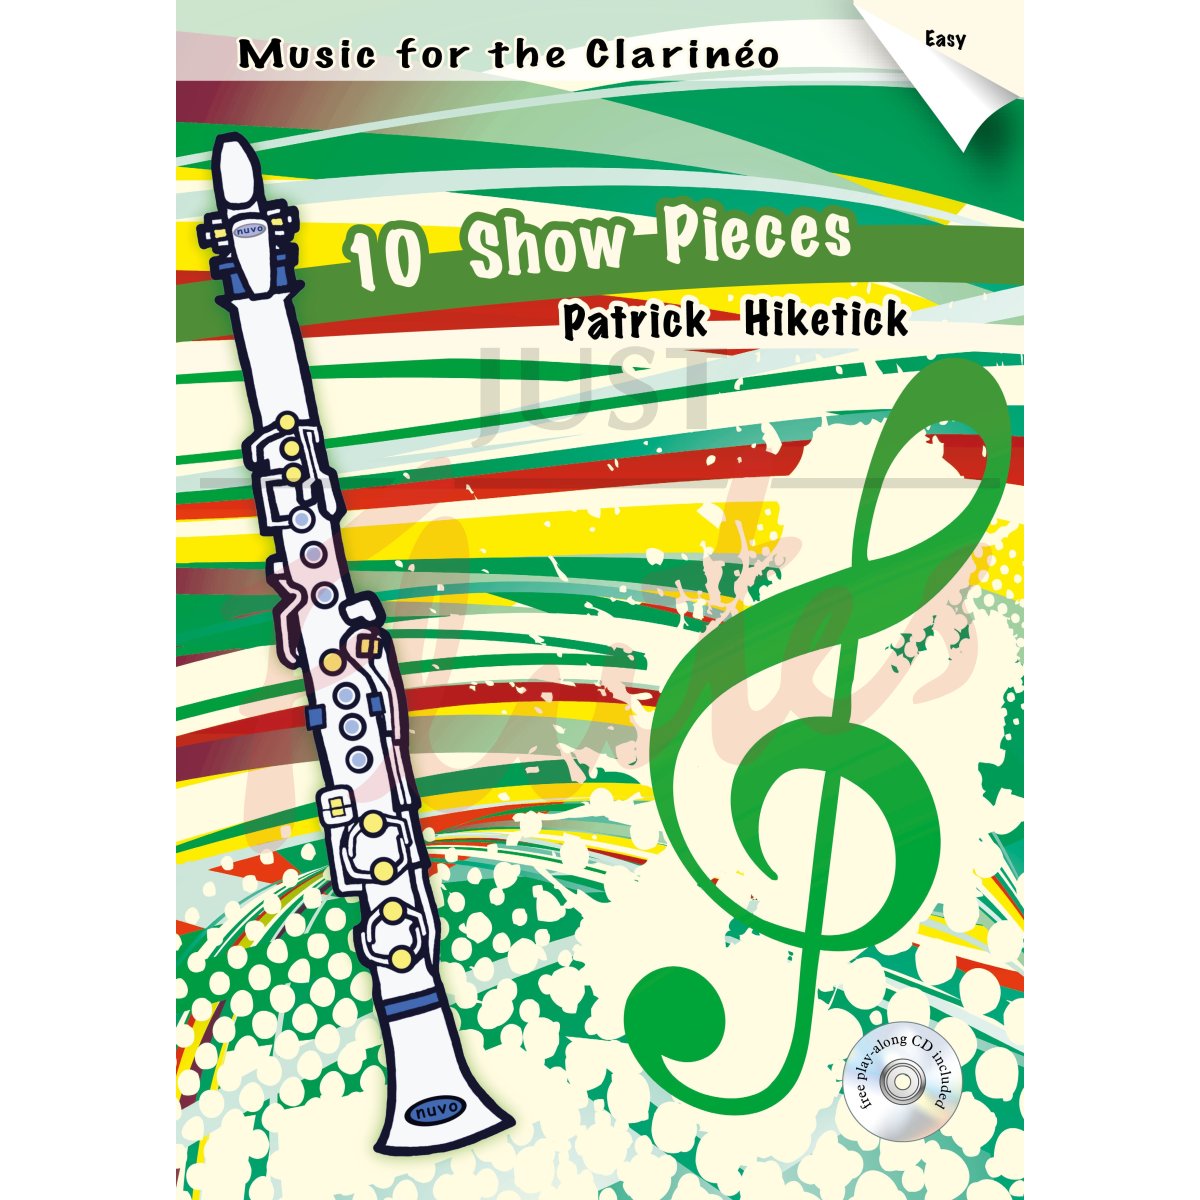 10 Show Pieces for Clarineo